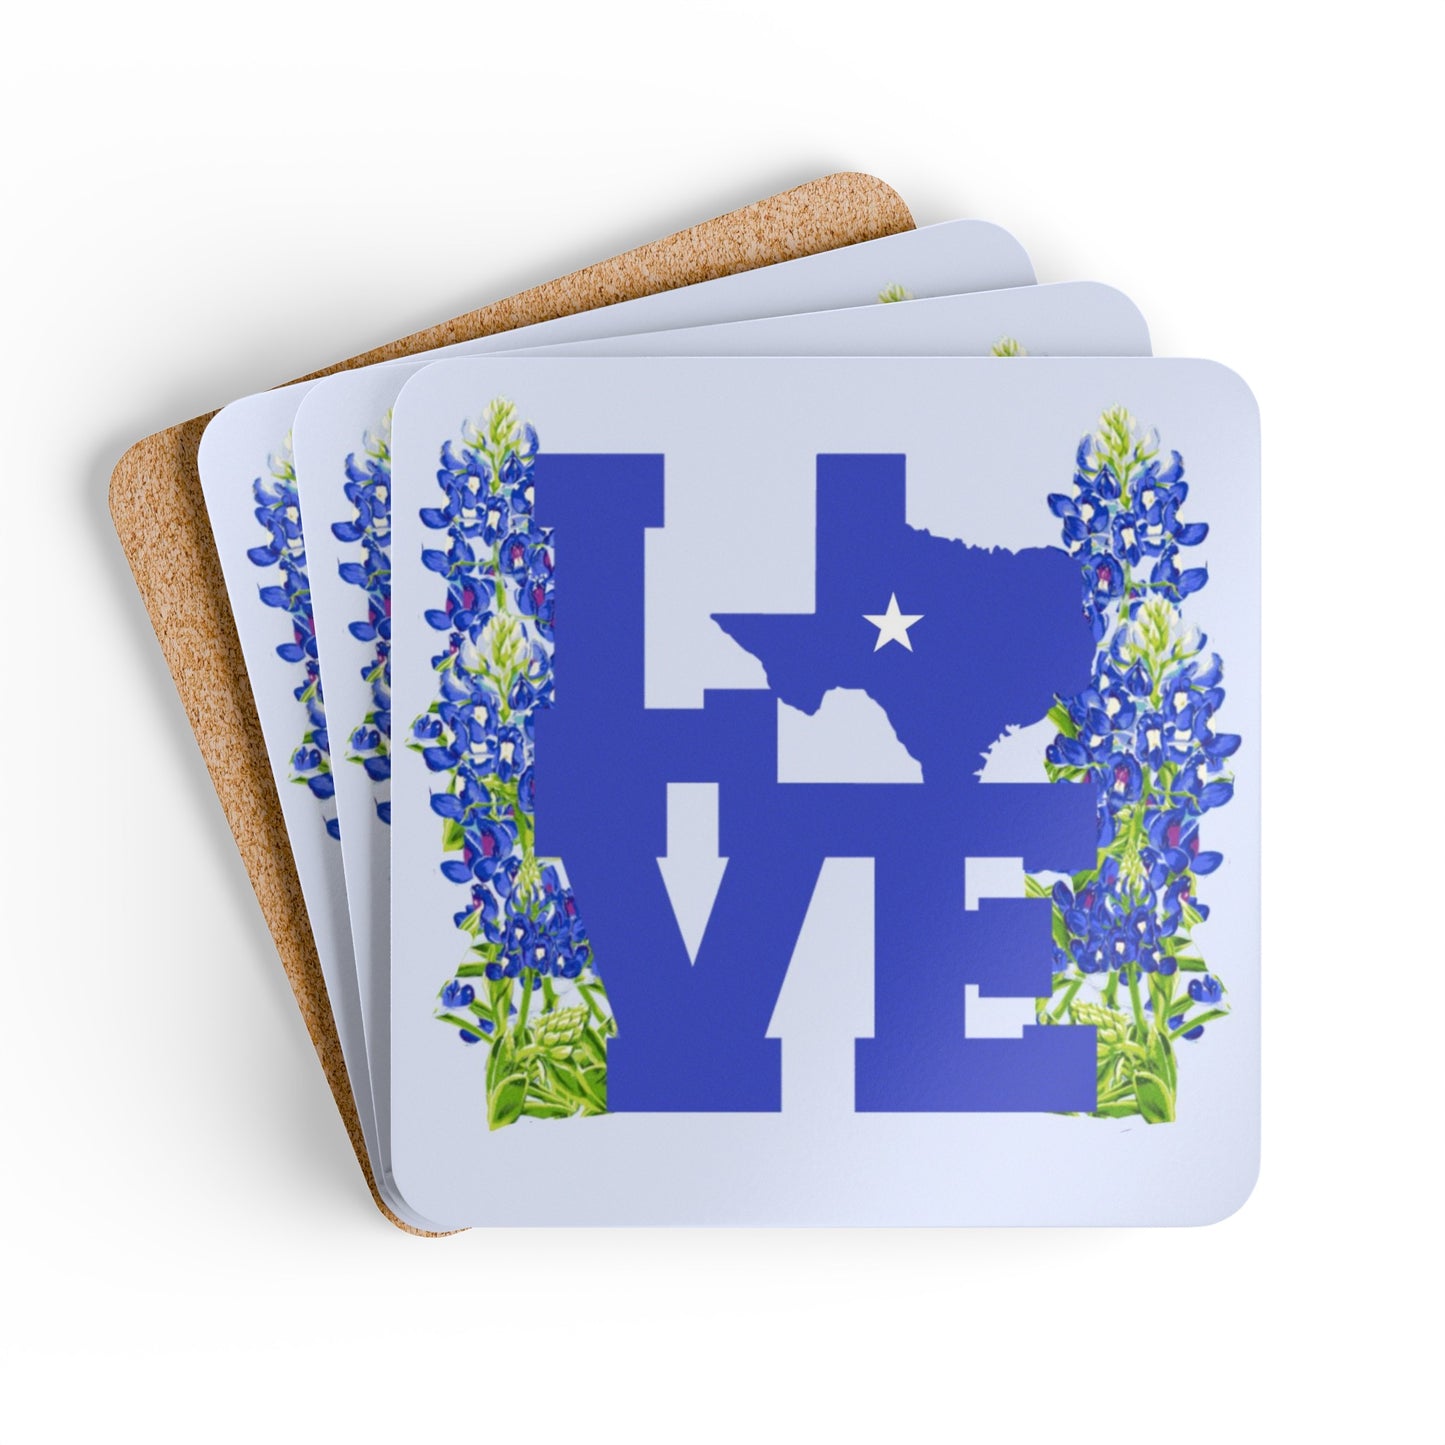 LOVE Texas and Bluebonnets Corkwood Coasters - Set of 4